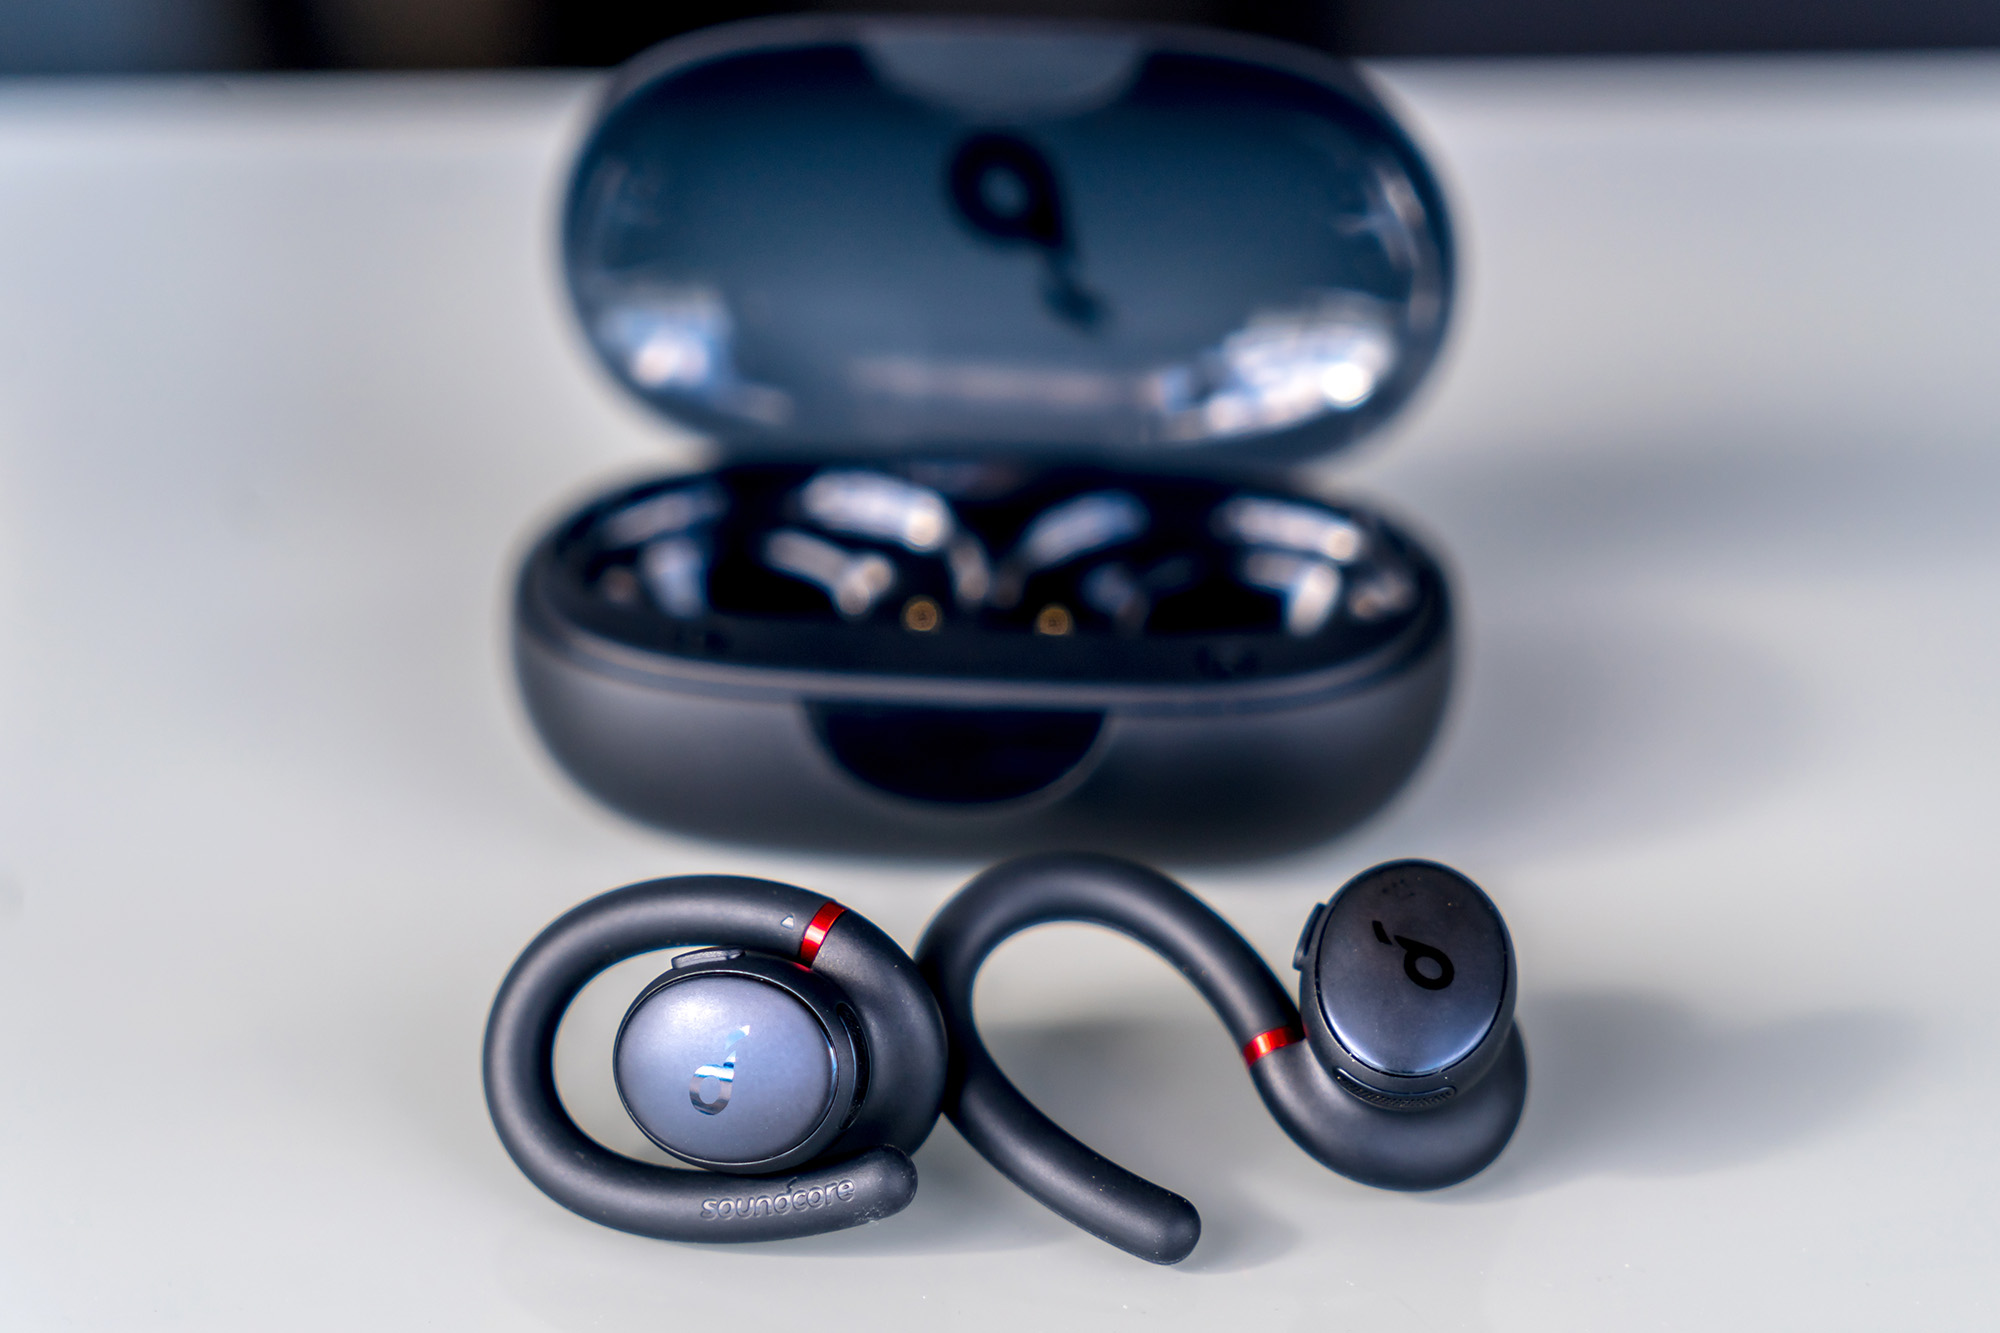 Jabra Elite 5 true wireless earbuds offer hybrid ANC so you can create your  own world » Gadget Flow